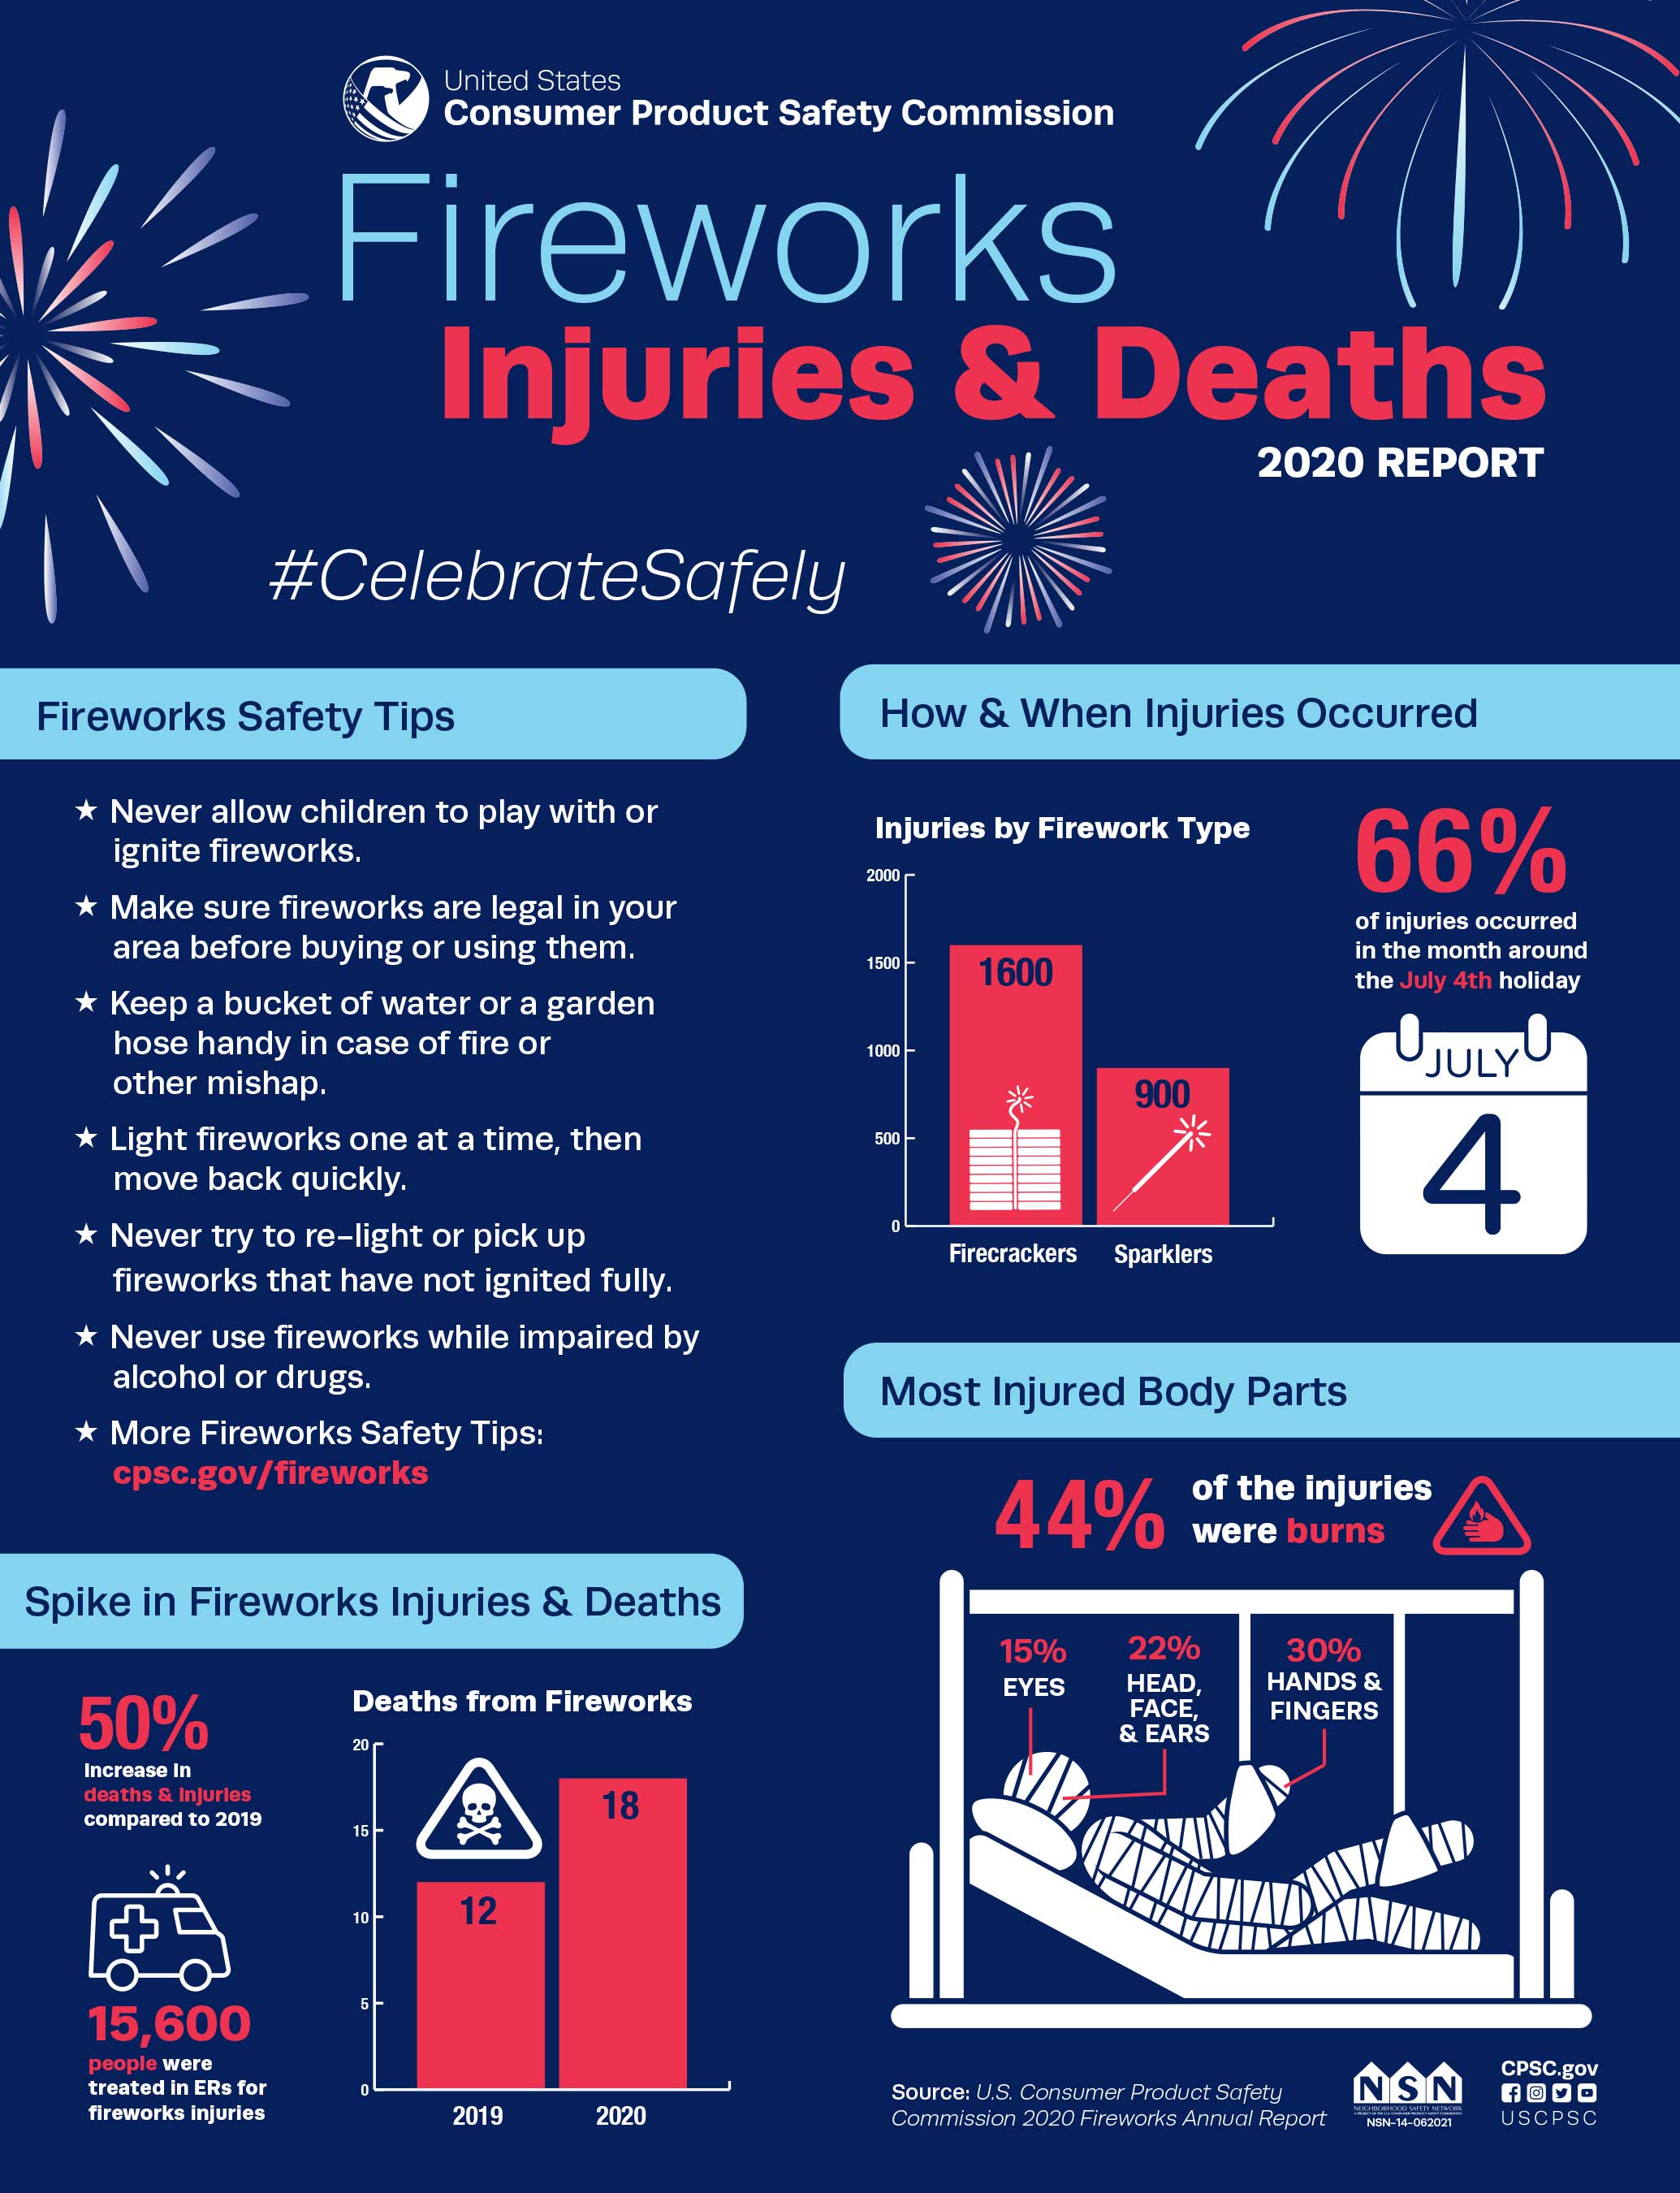 FireworksRelated Injuries and Deaths Spiked During the COVID19 Pandemic